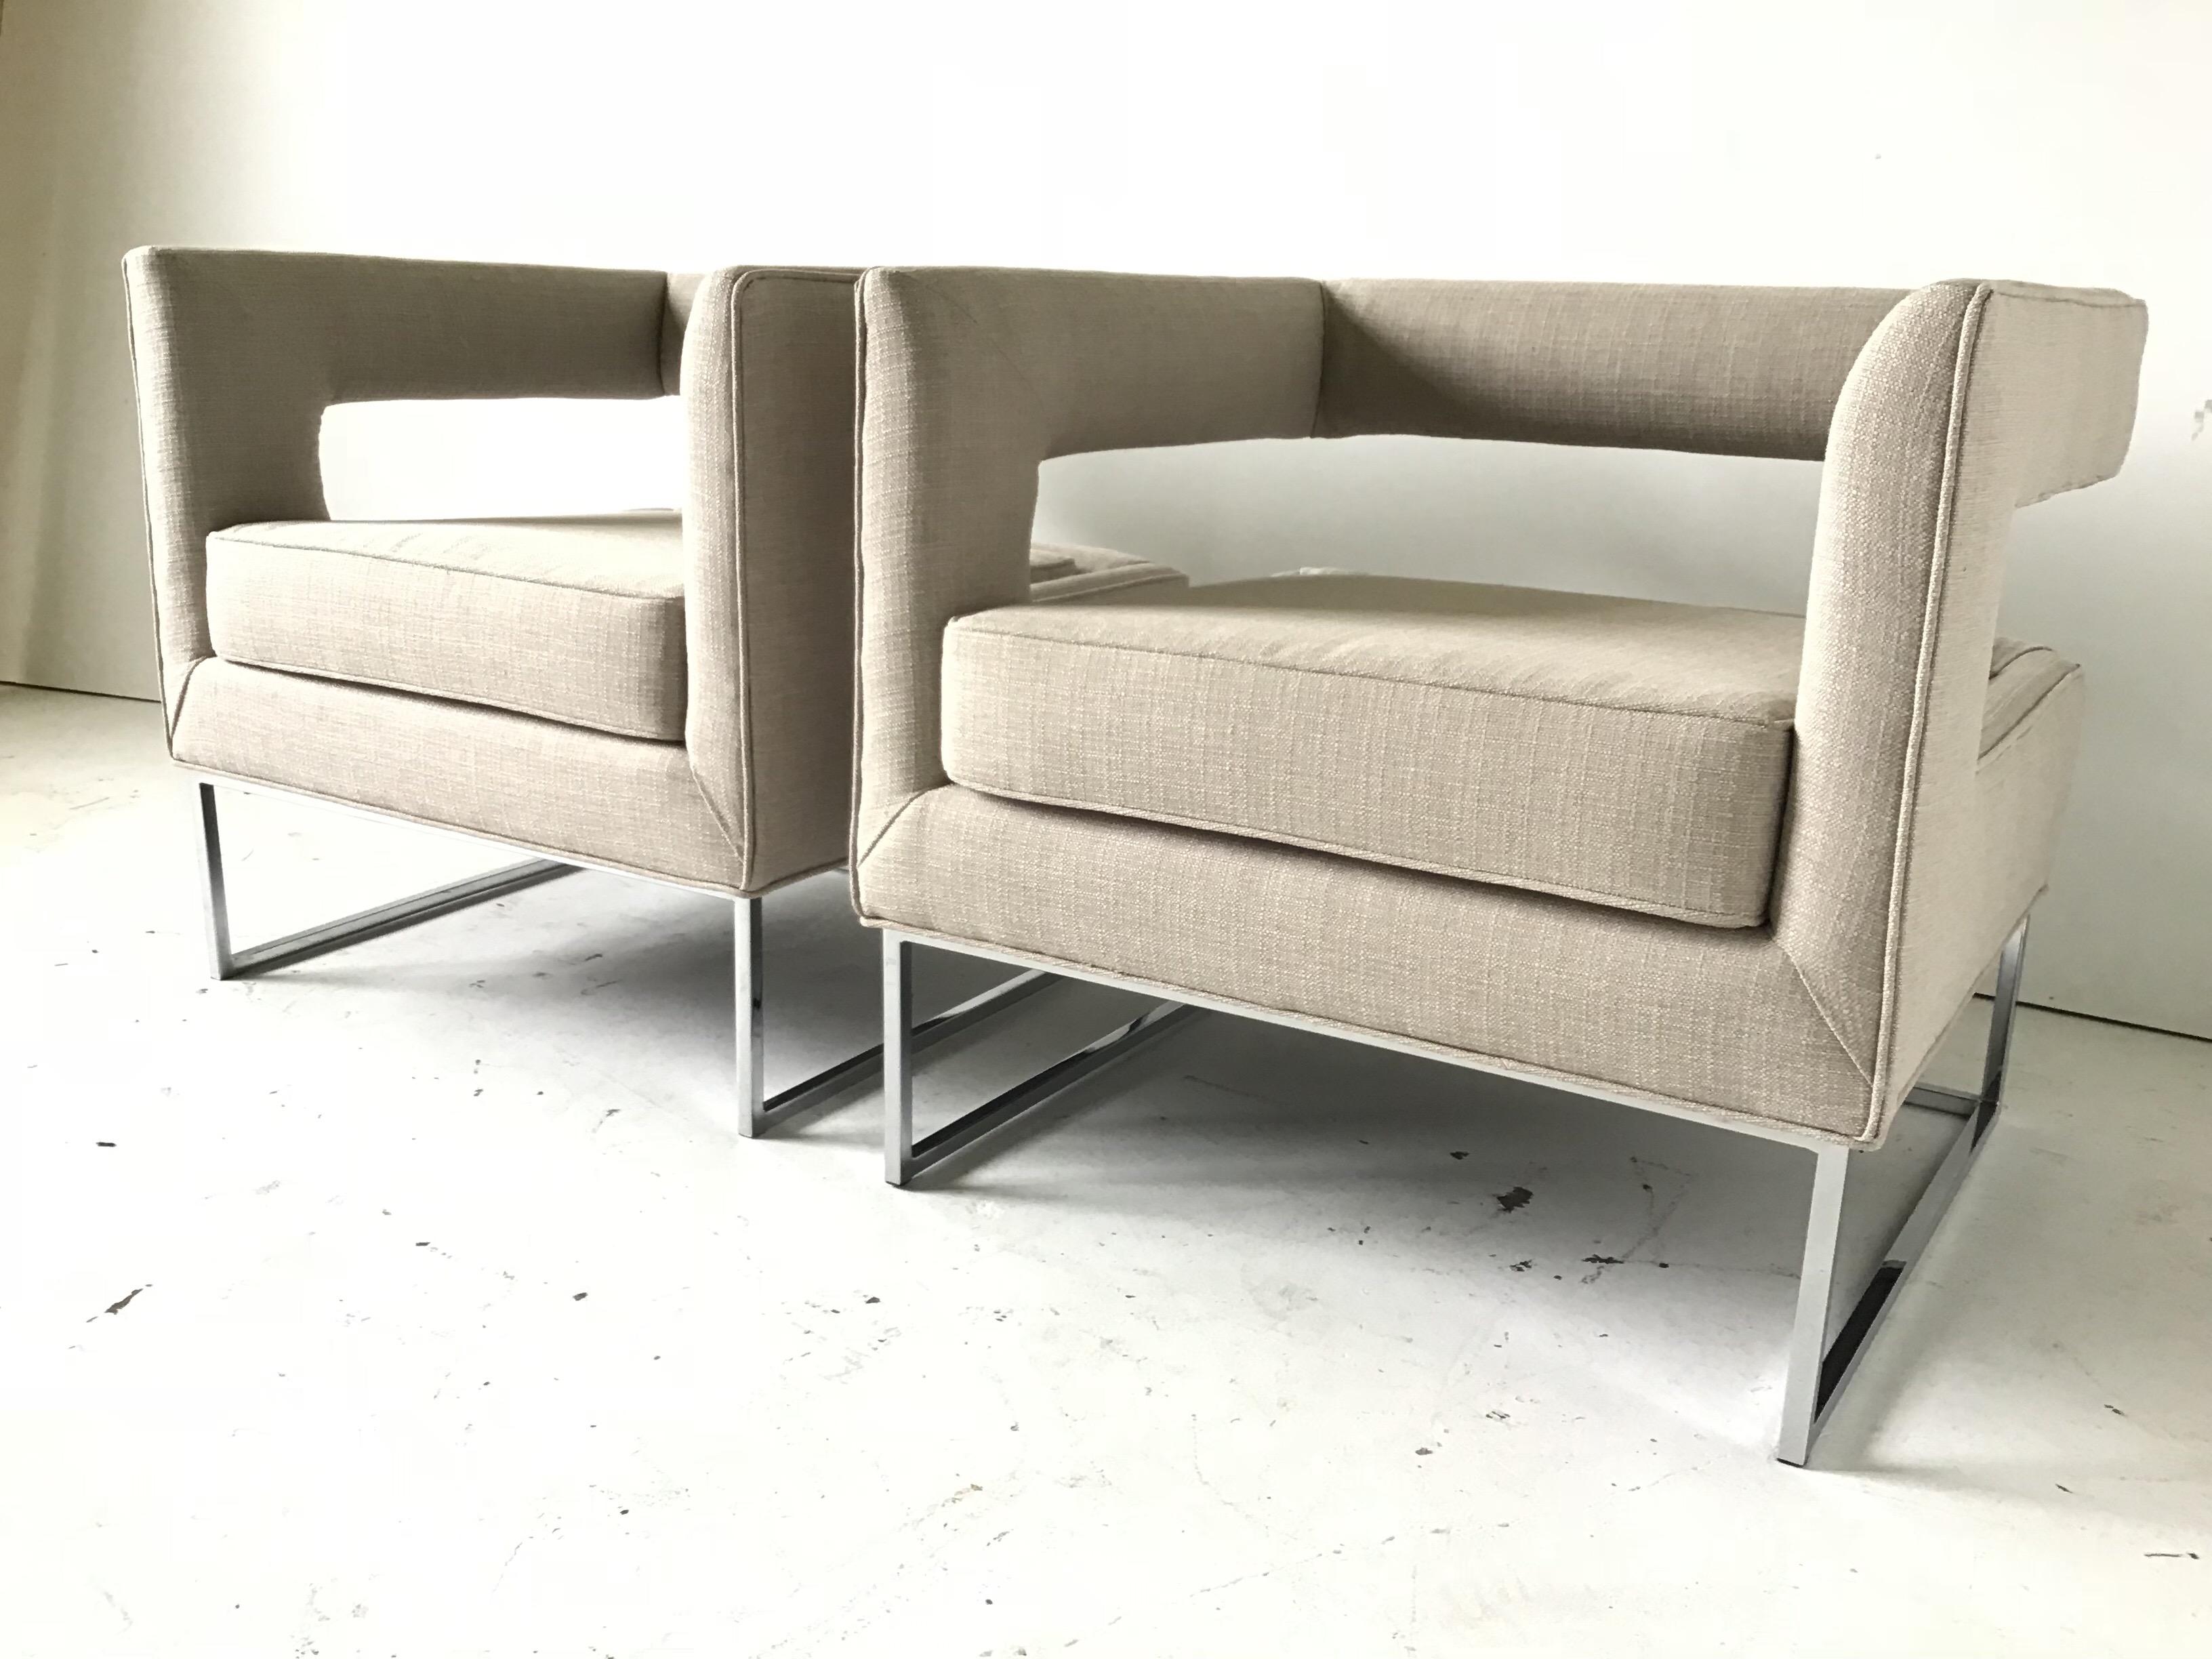 This is the most amazing pair of vintage modern lounge chairs I have seen. They are for Bernhardt’s flair collection. The backs appear to float. They are cube chairs with small square tubular chrome cube bases. They have been reupholstered.